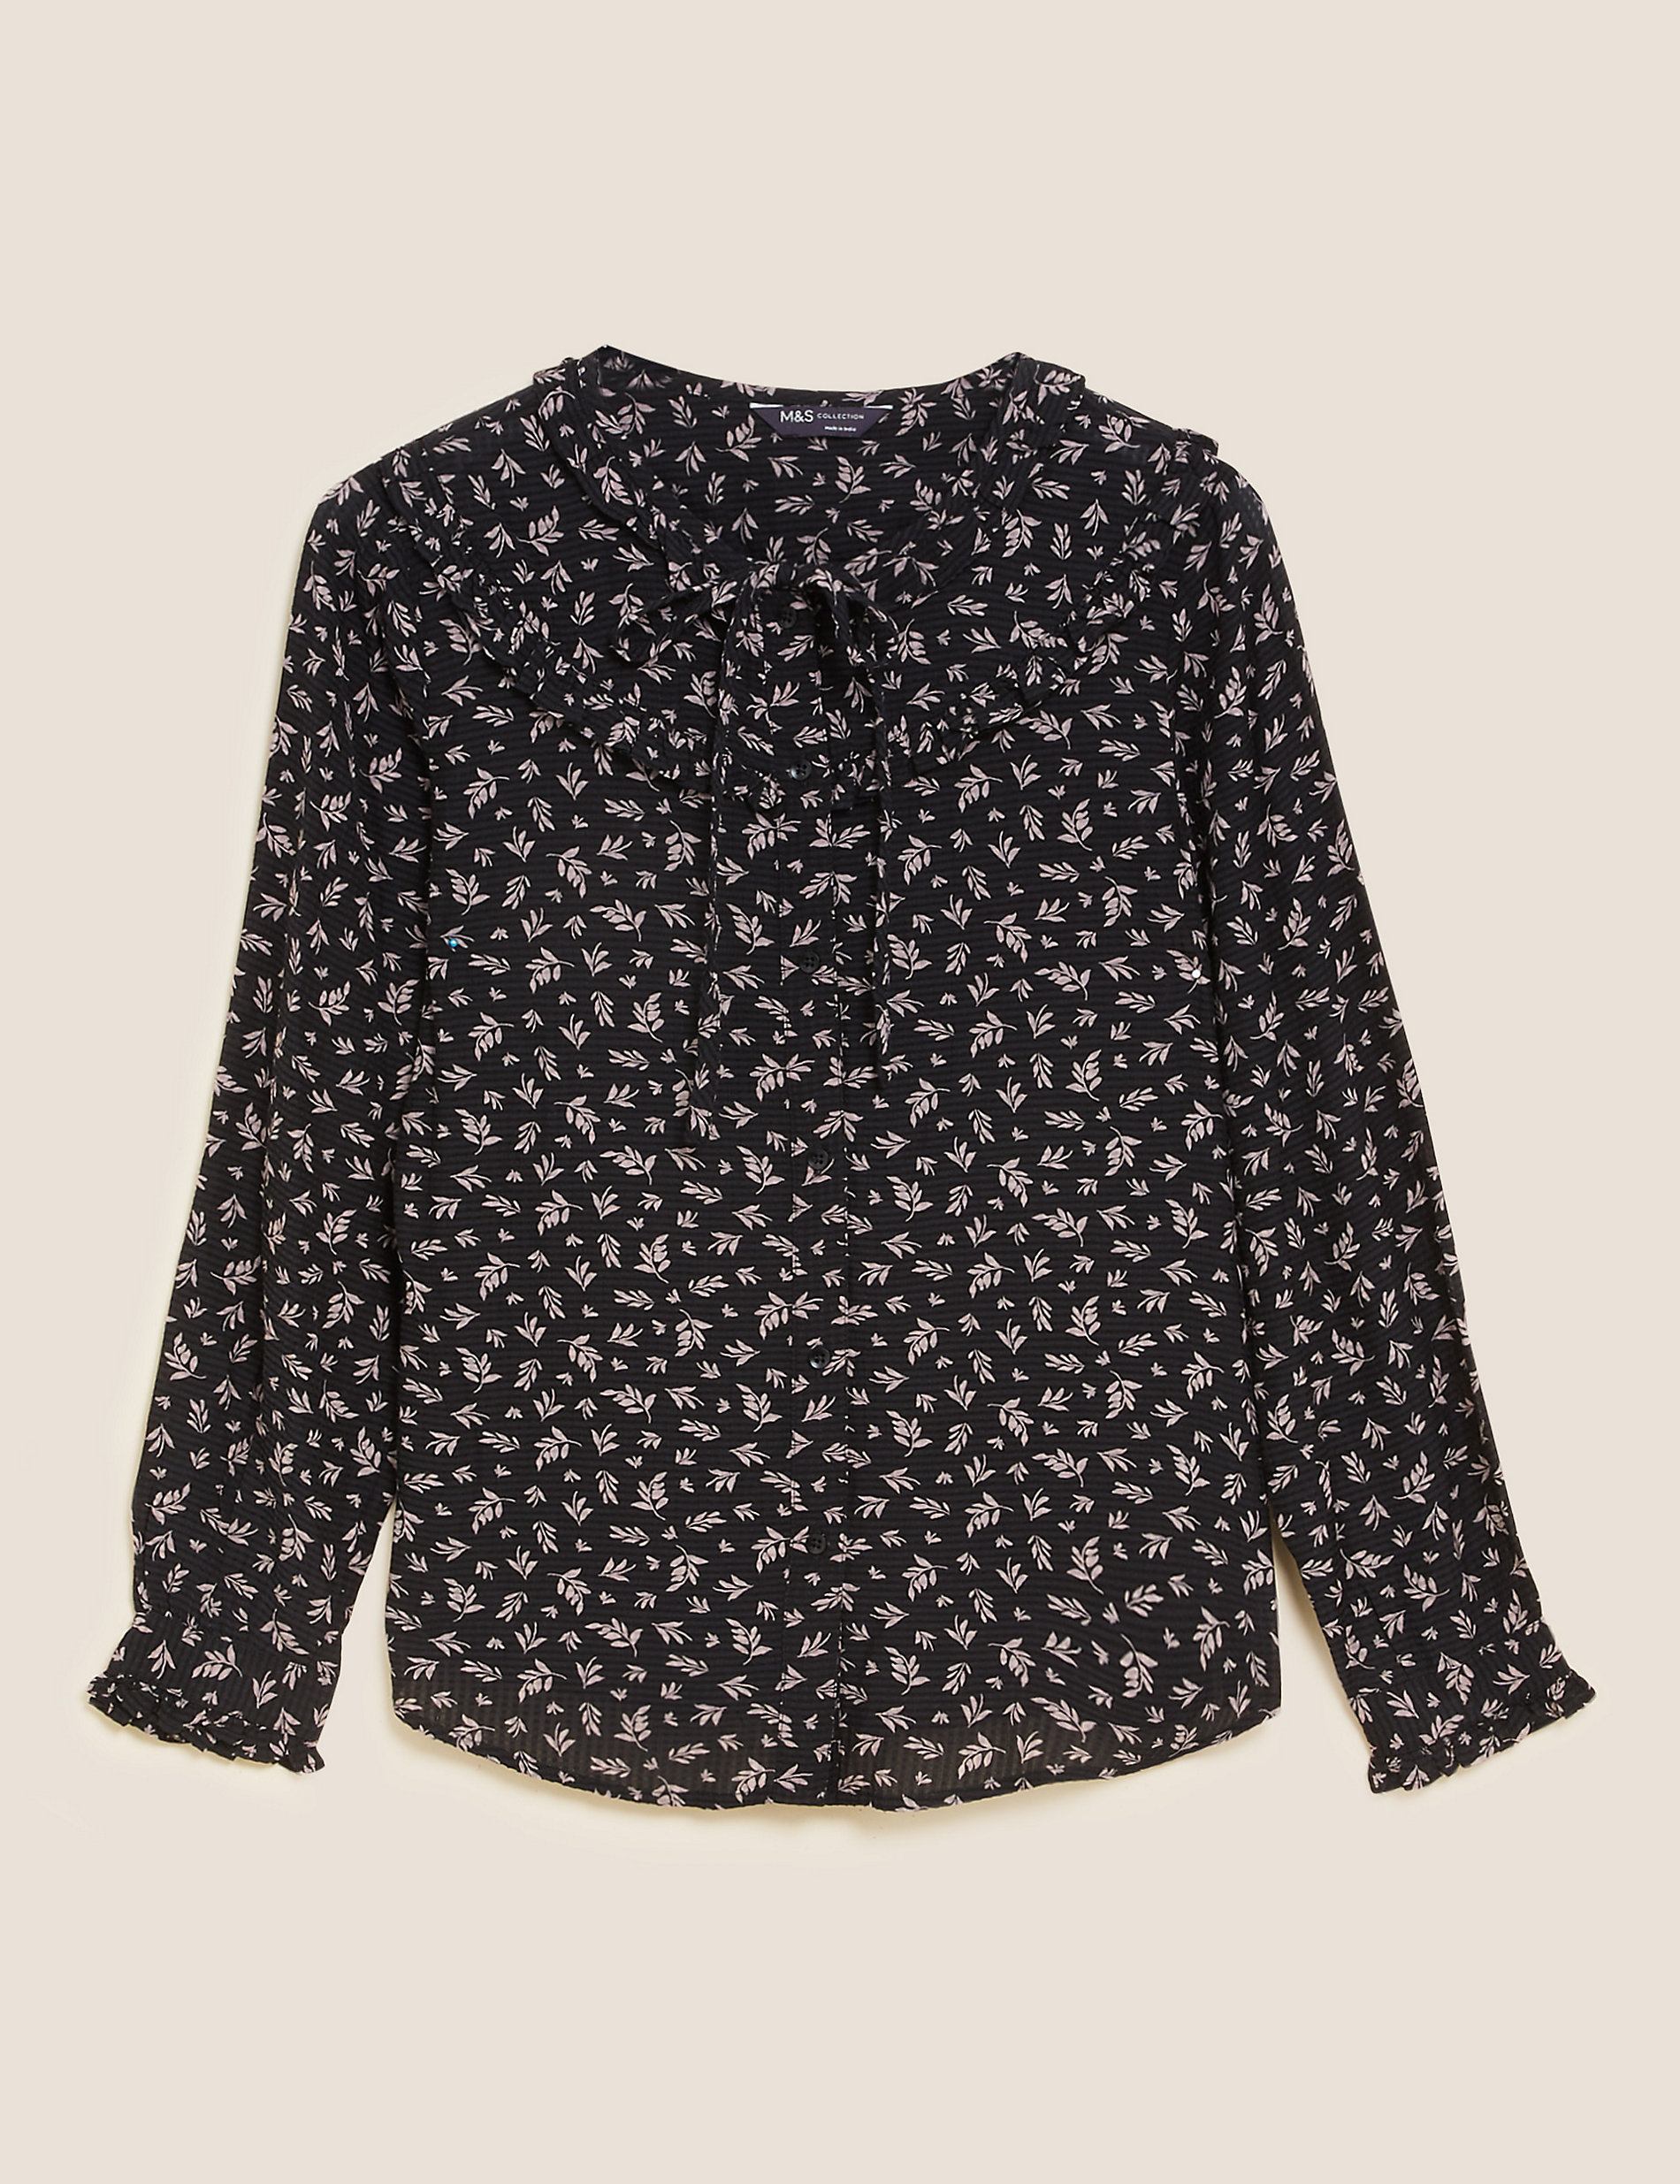 Cotton Rich Printed Long Sleeve Blouse